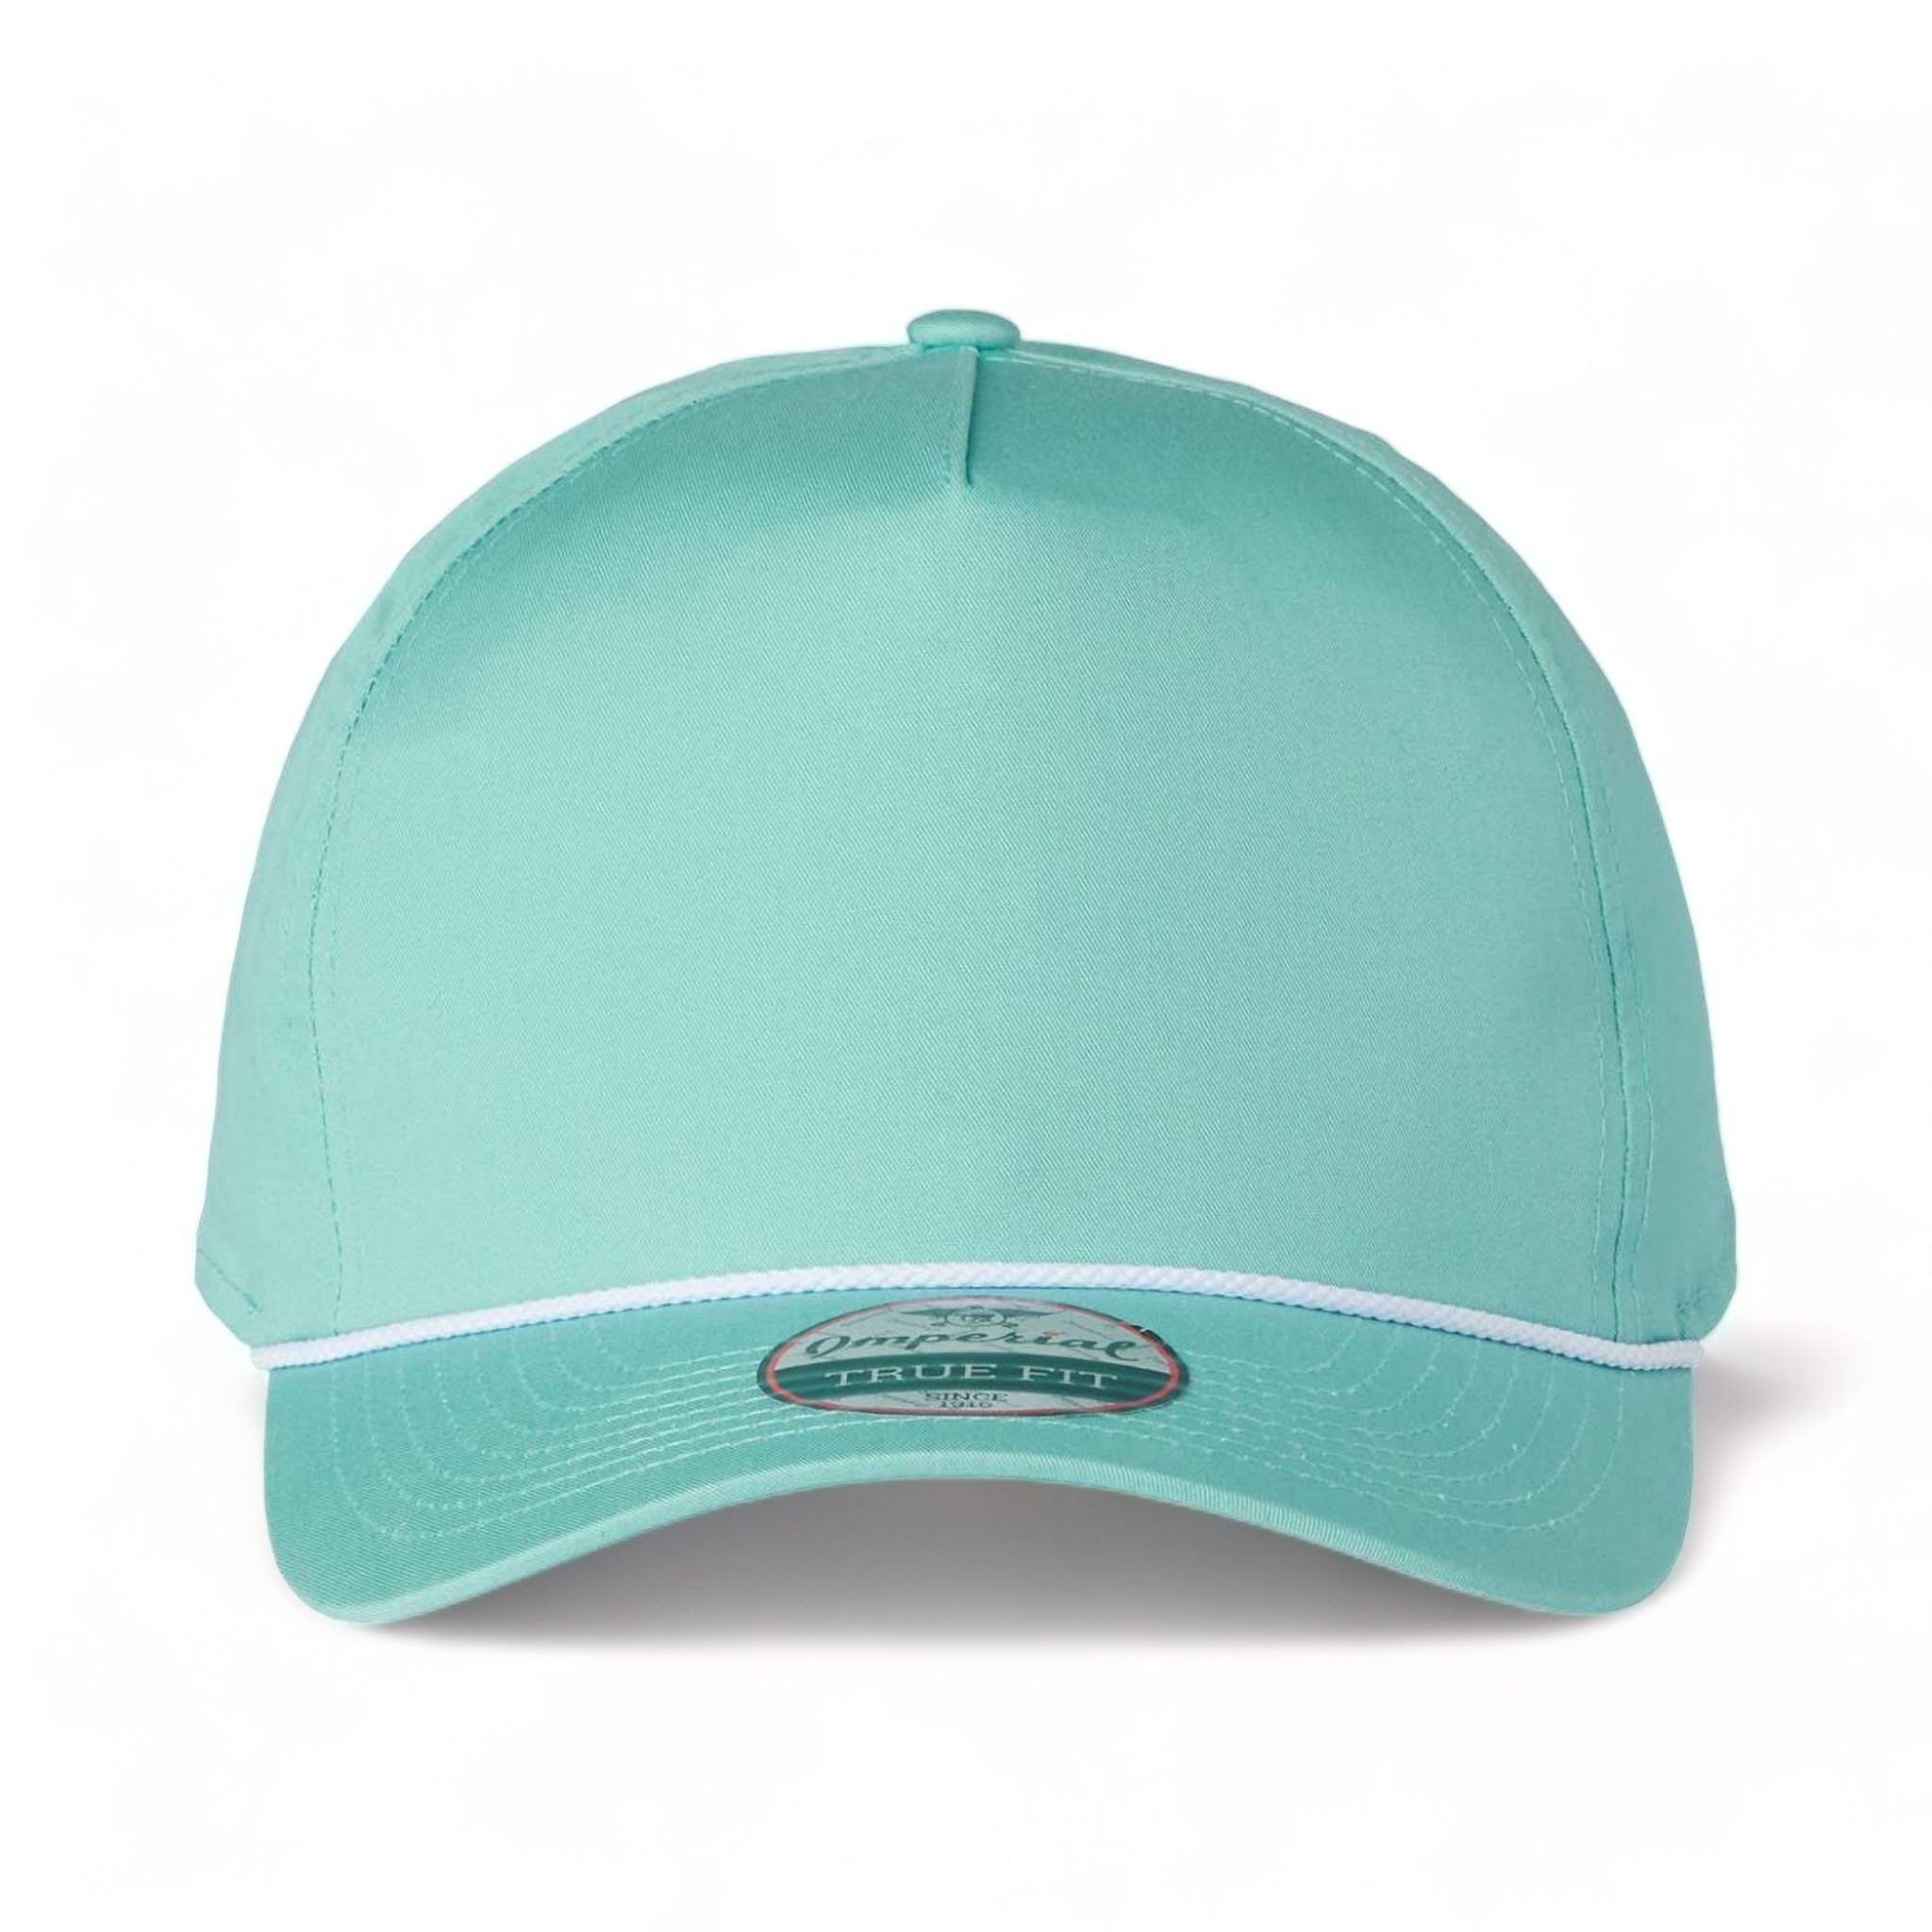 Front view of Imperial 5056 custom hat in sea green and white